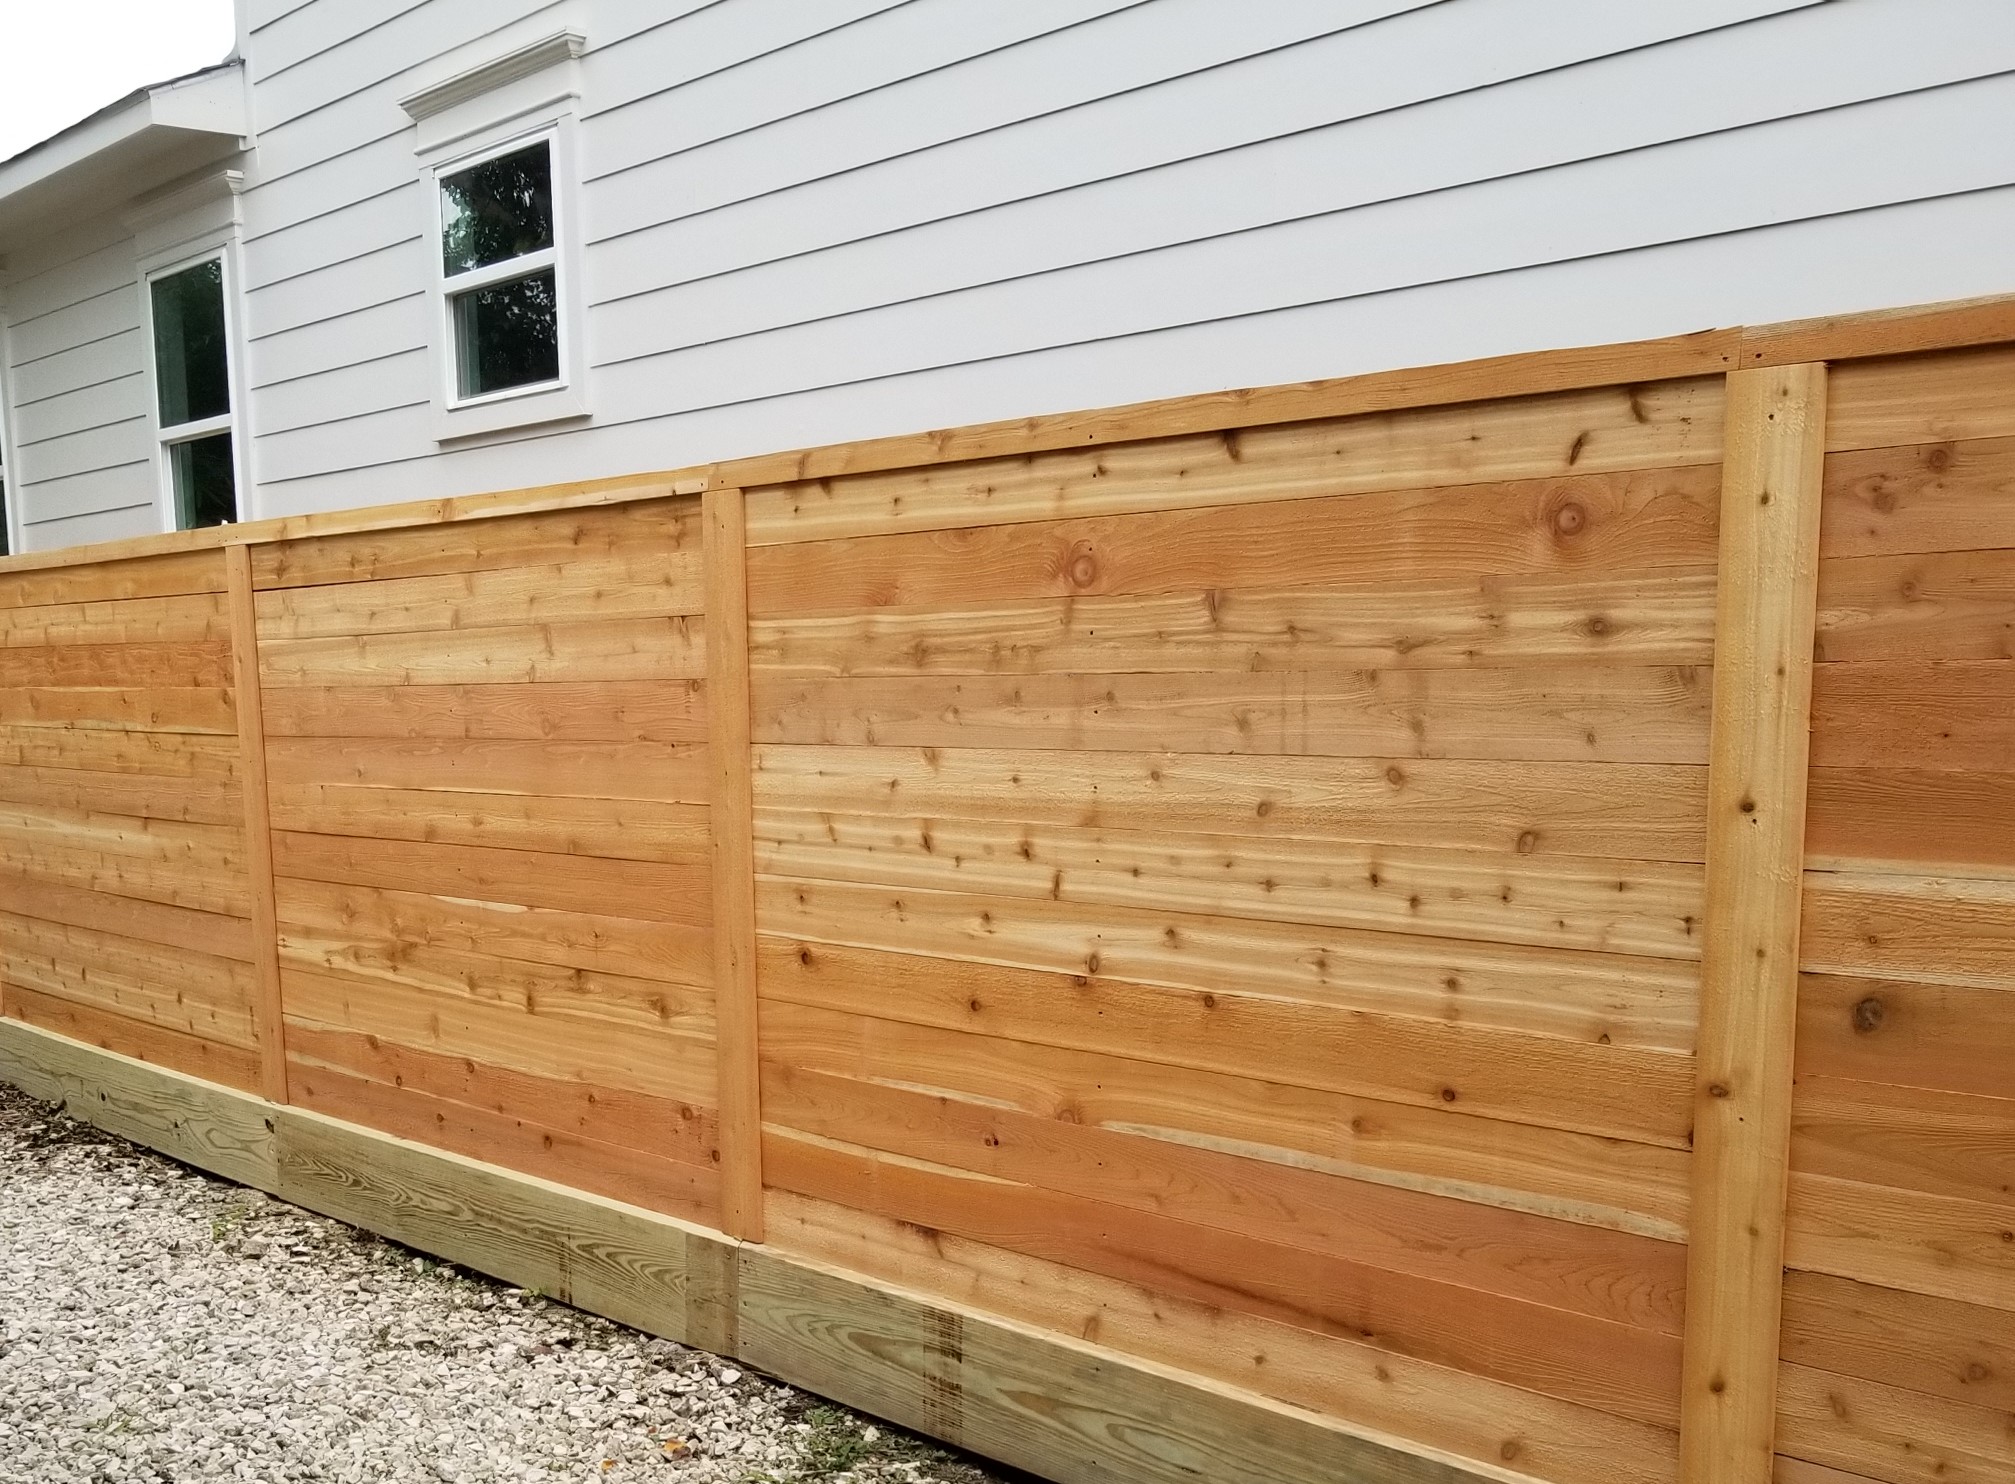 Horizontal privacy fence with 2x12 pressure treated rot board and cedar pickets.